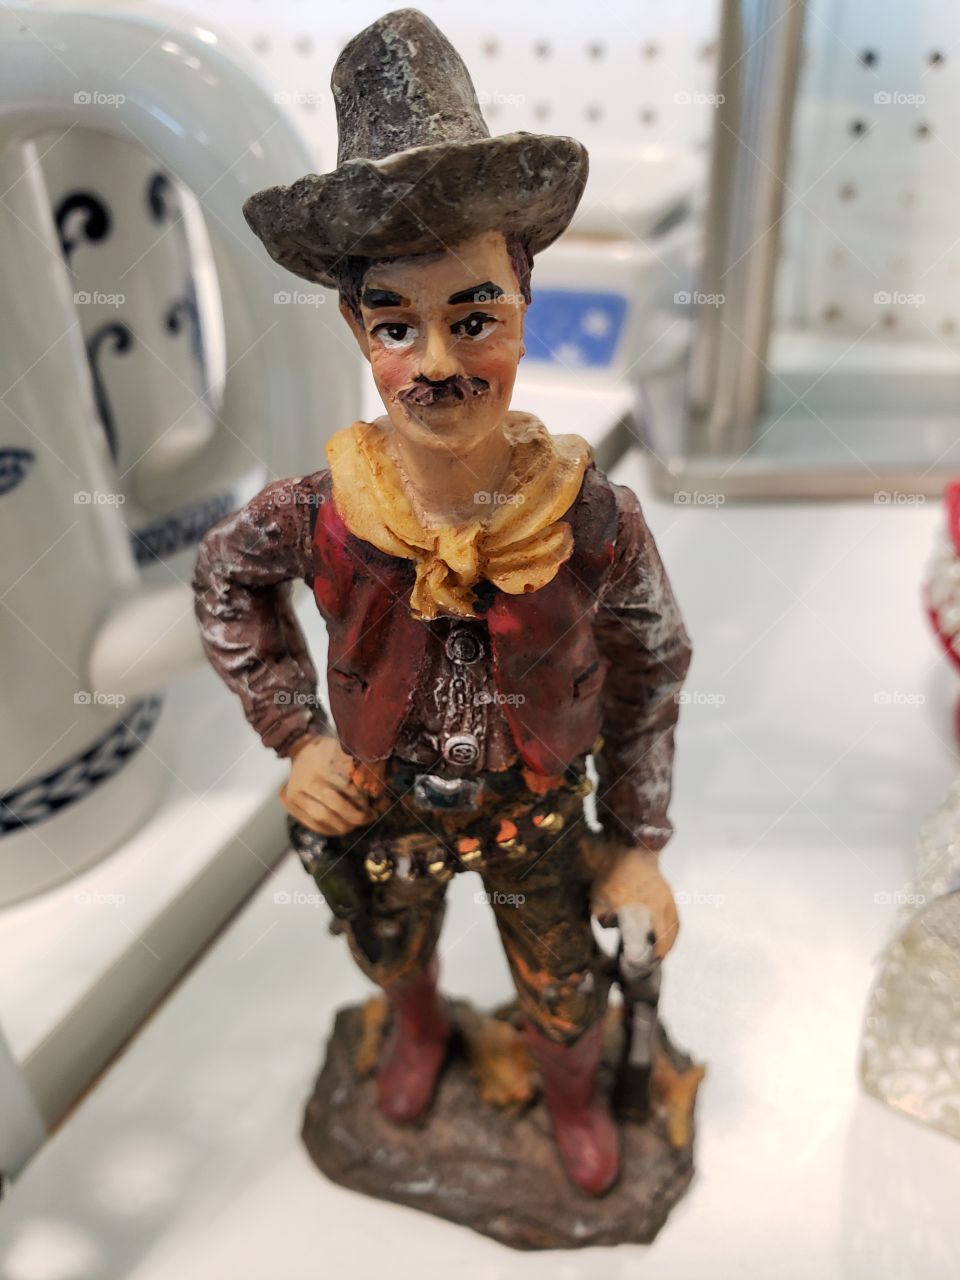 When a .99 cent figurine catches your eye at a thrift store...